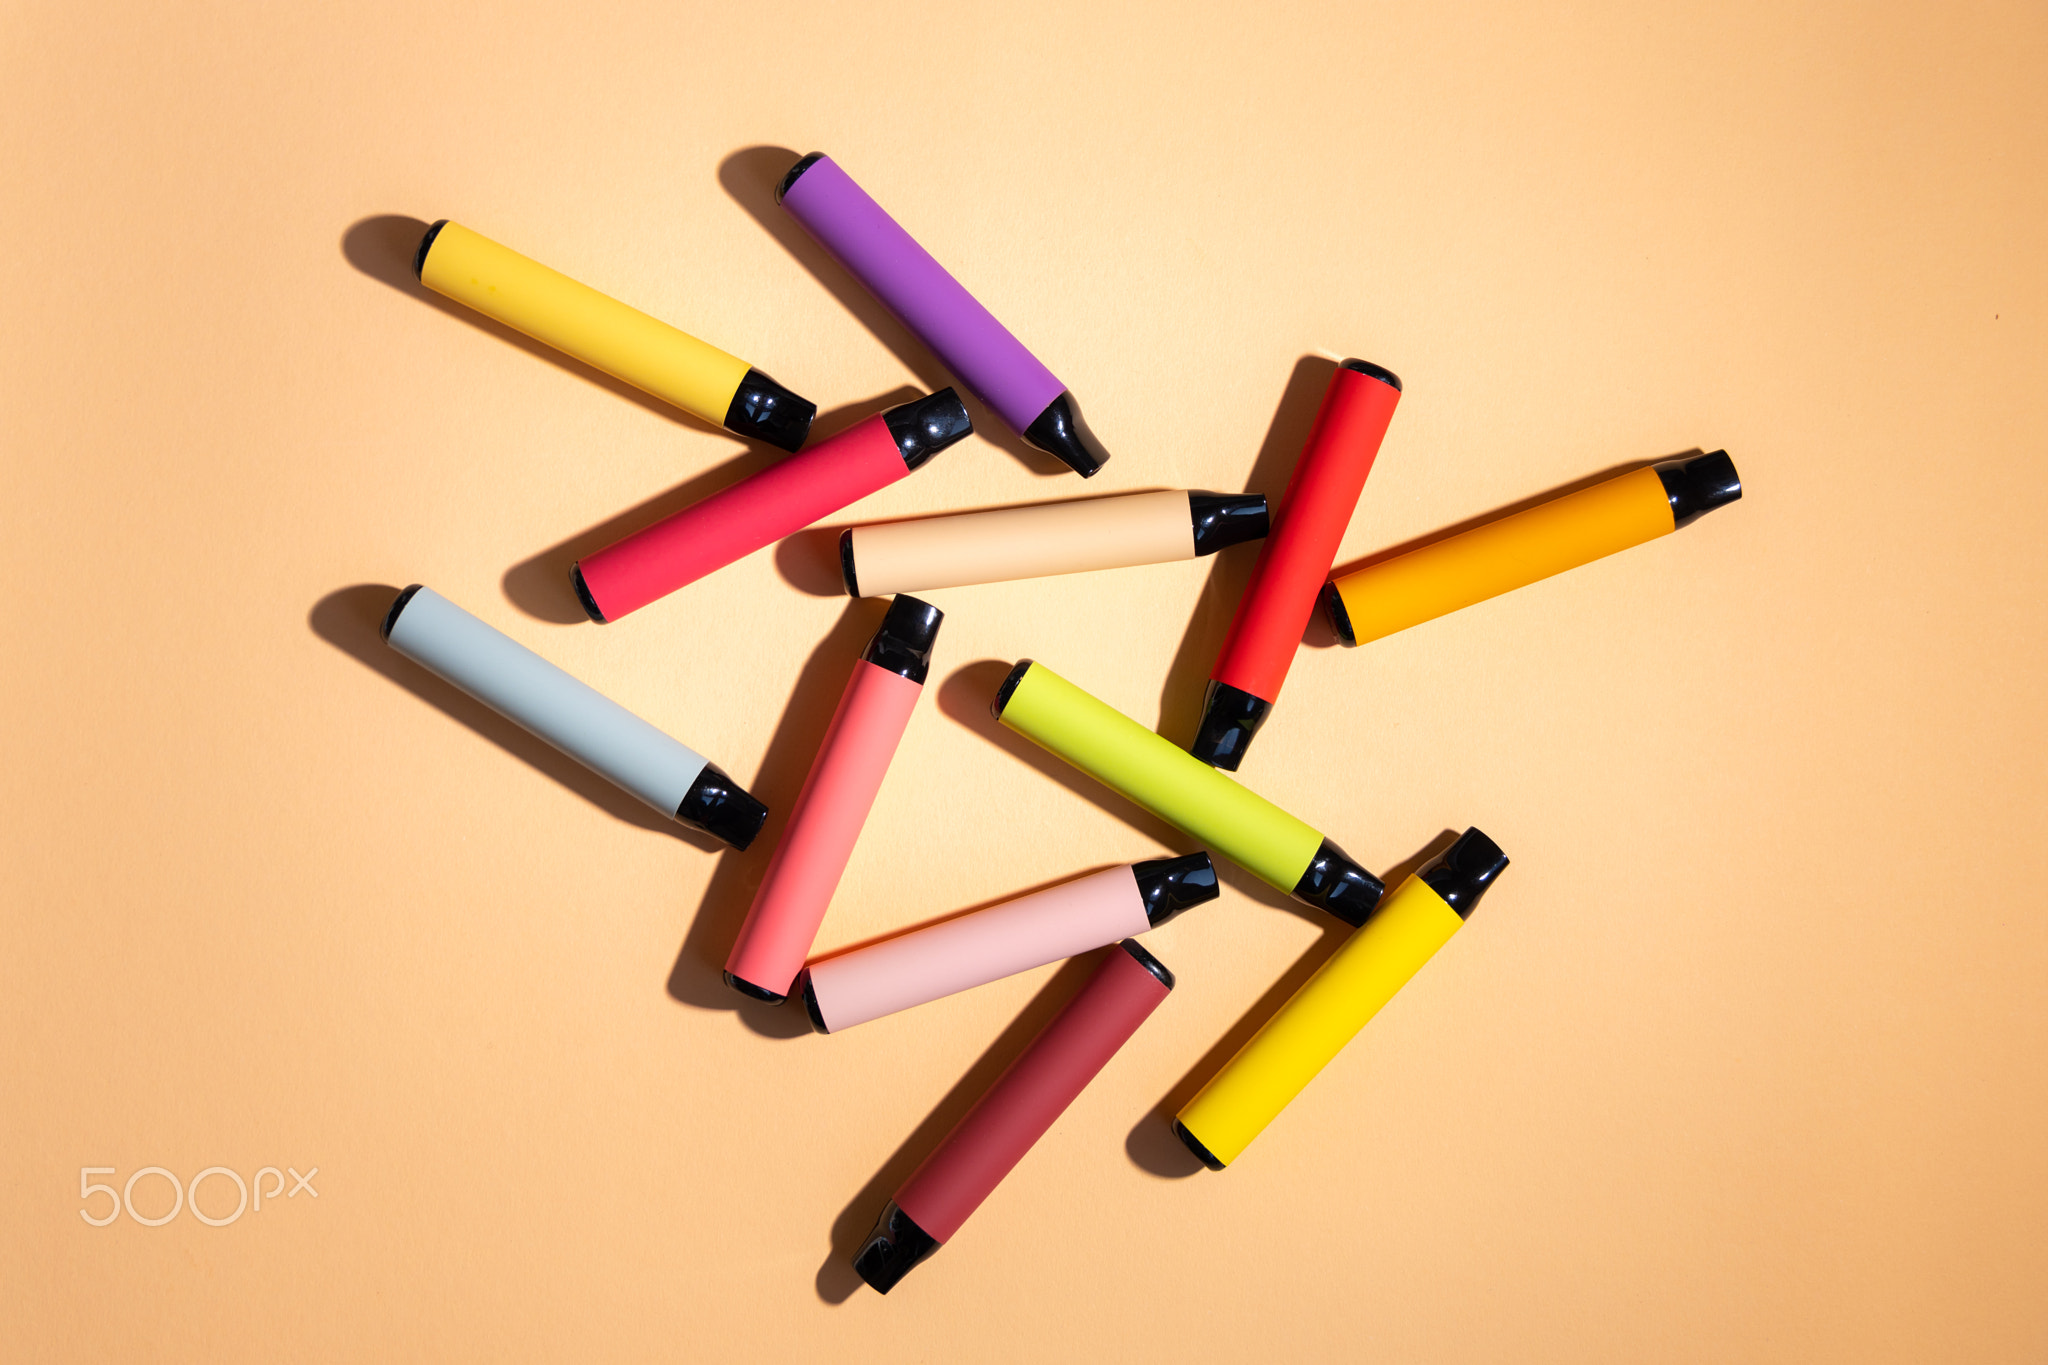 Layout of colorful disposable vapor stick on a light background